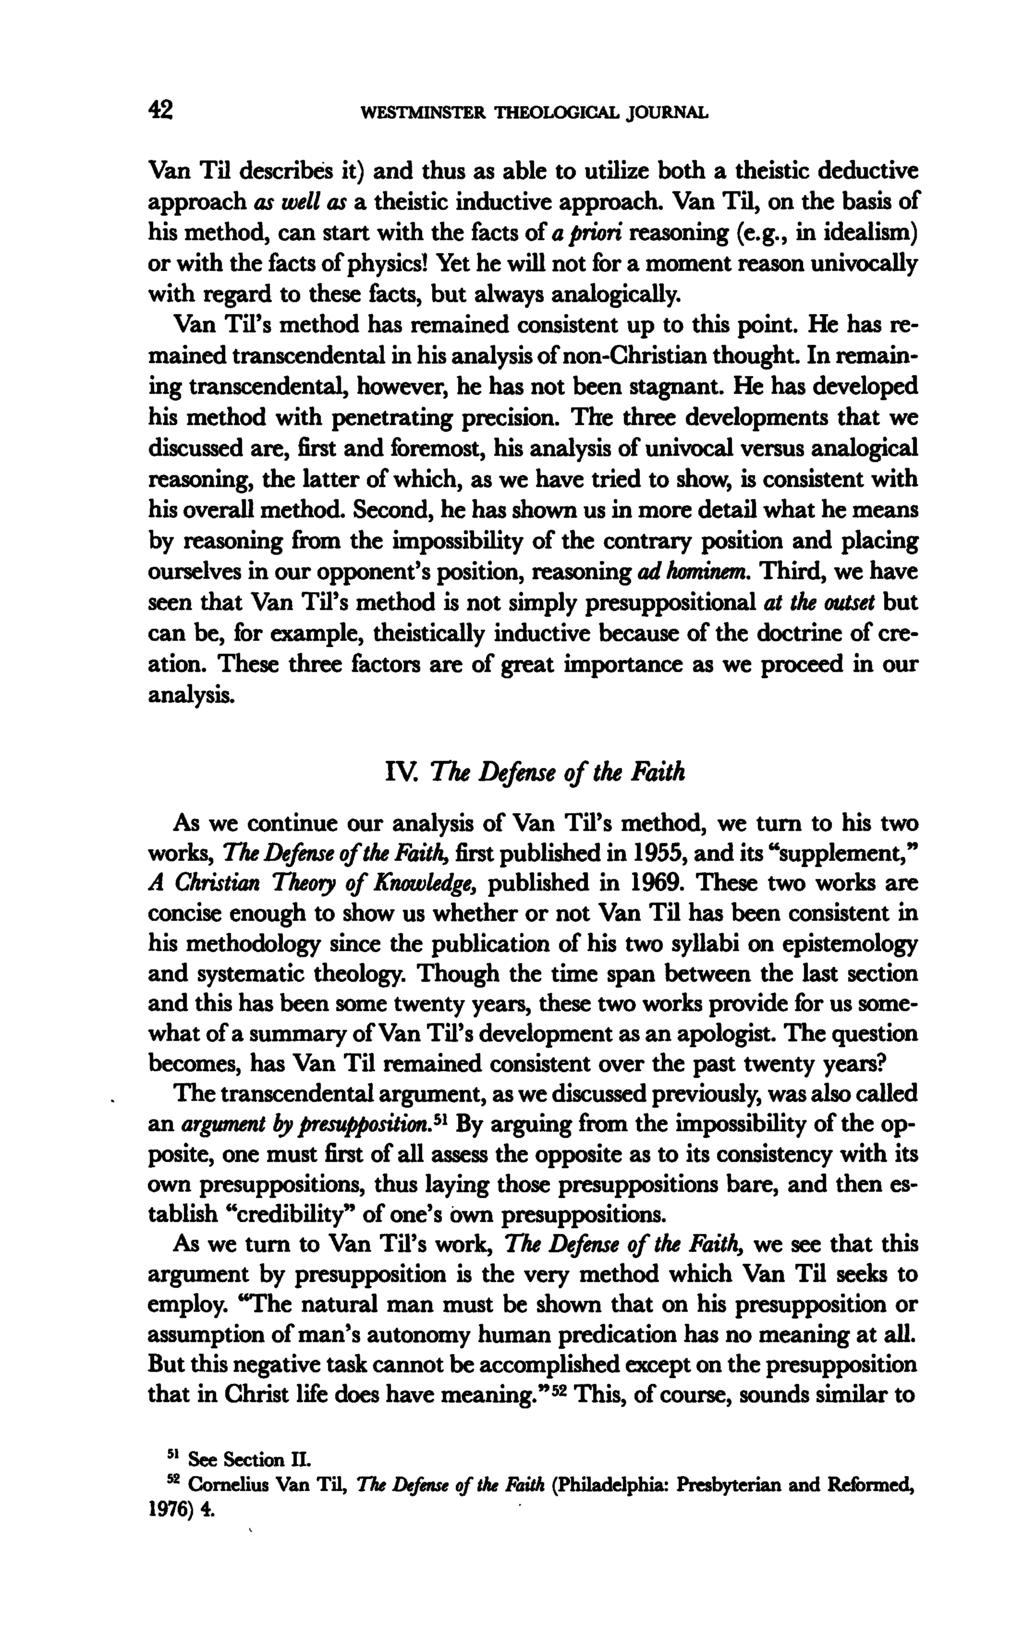 42 WESTMINSTER THEOLOGICAL JOURNAL Van Til describes it) and thus as able to utilize both a theistic deductive approach as well as a theistic inductive approach.